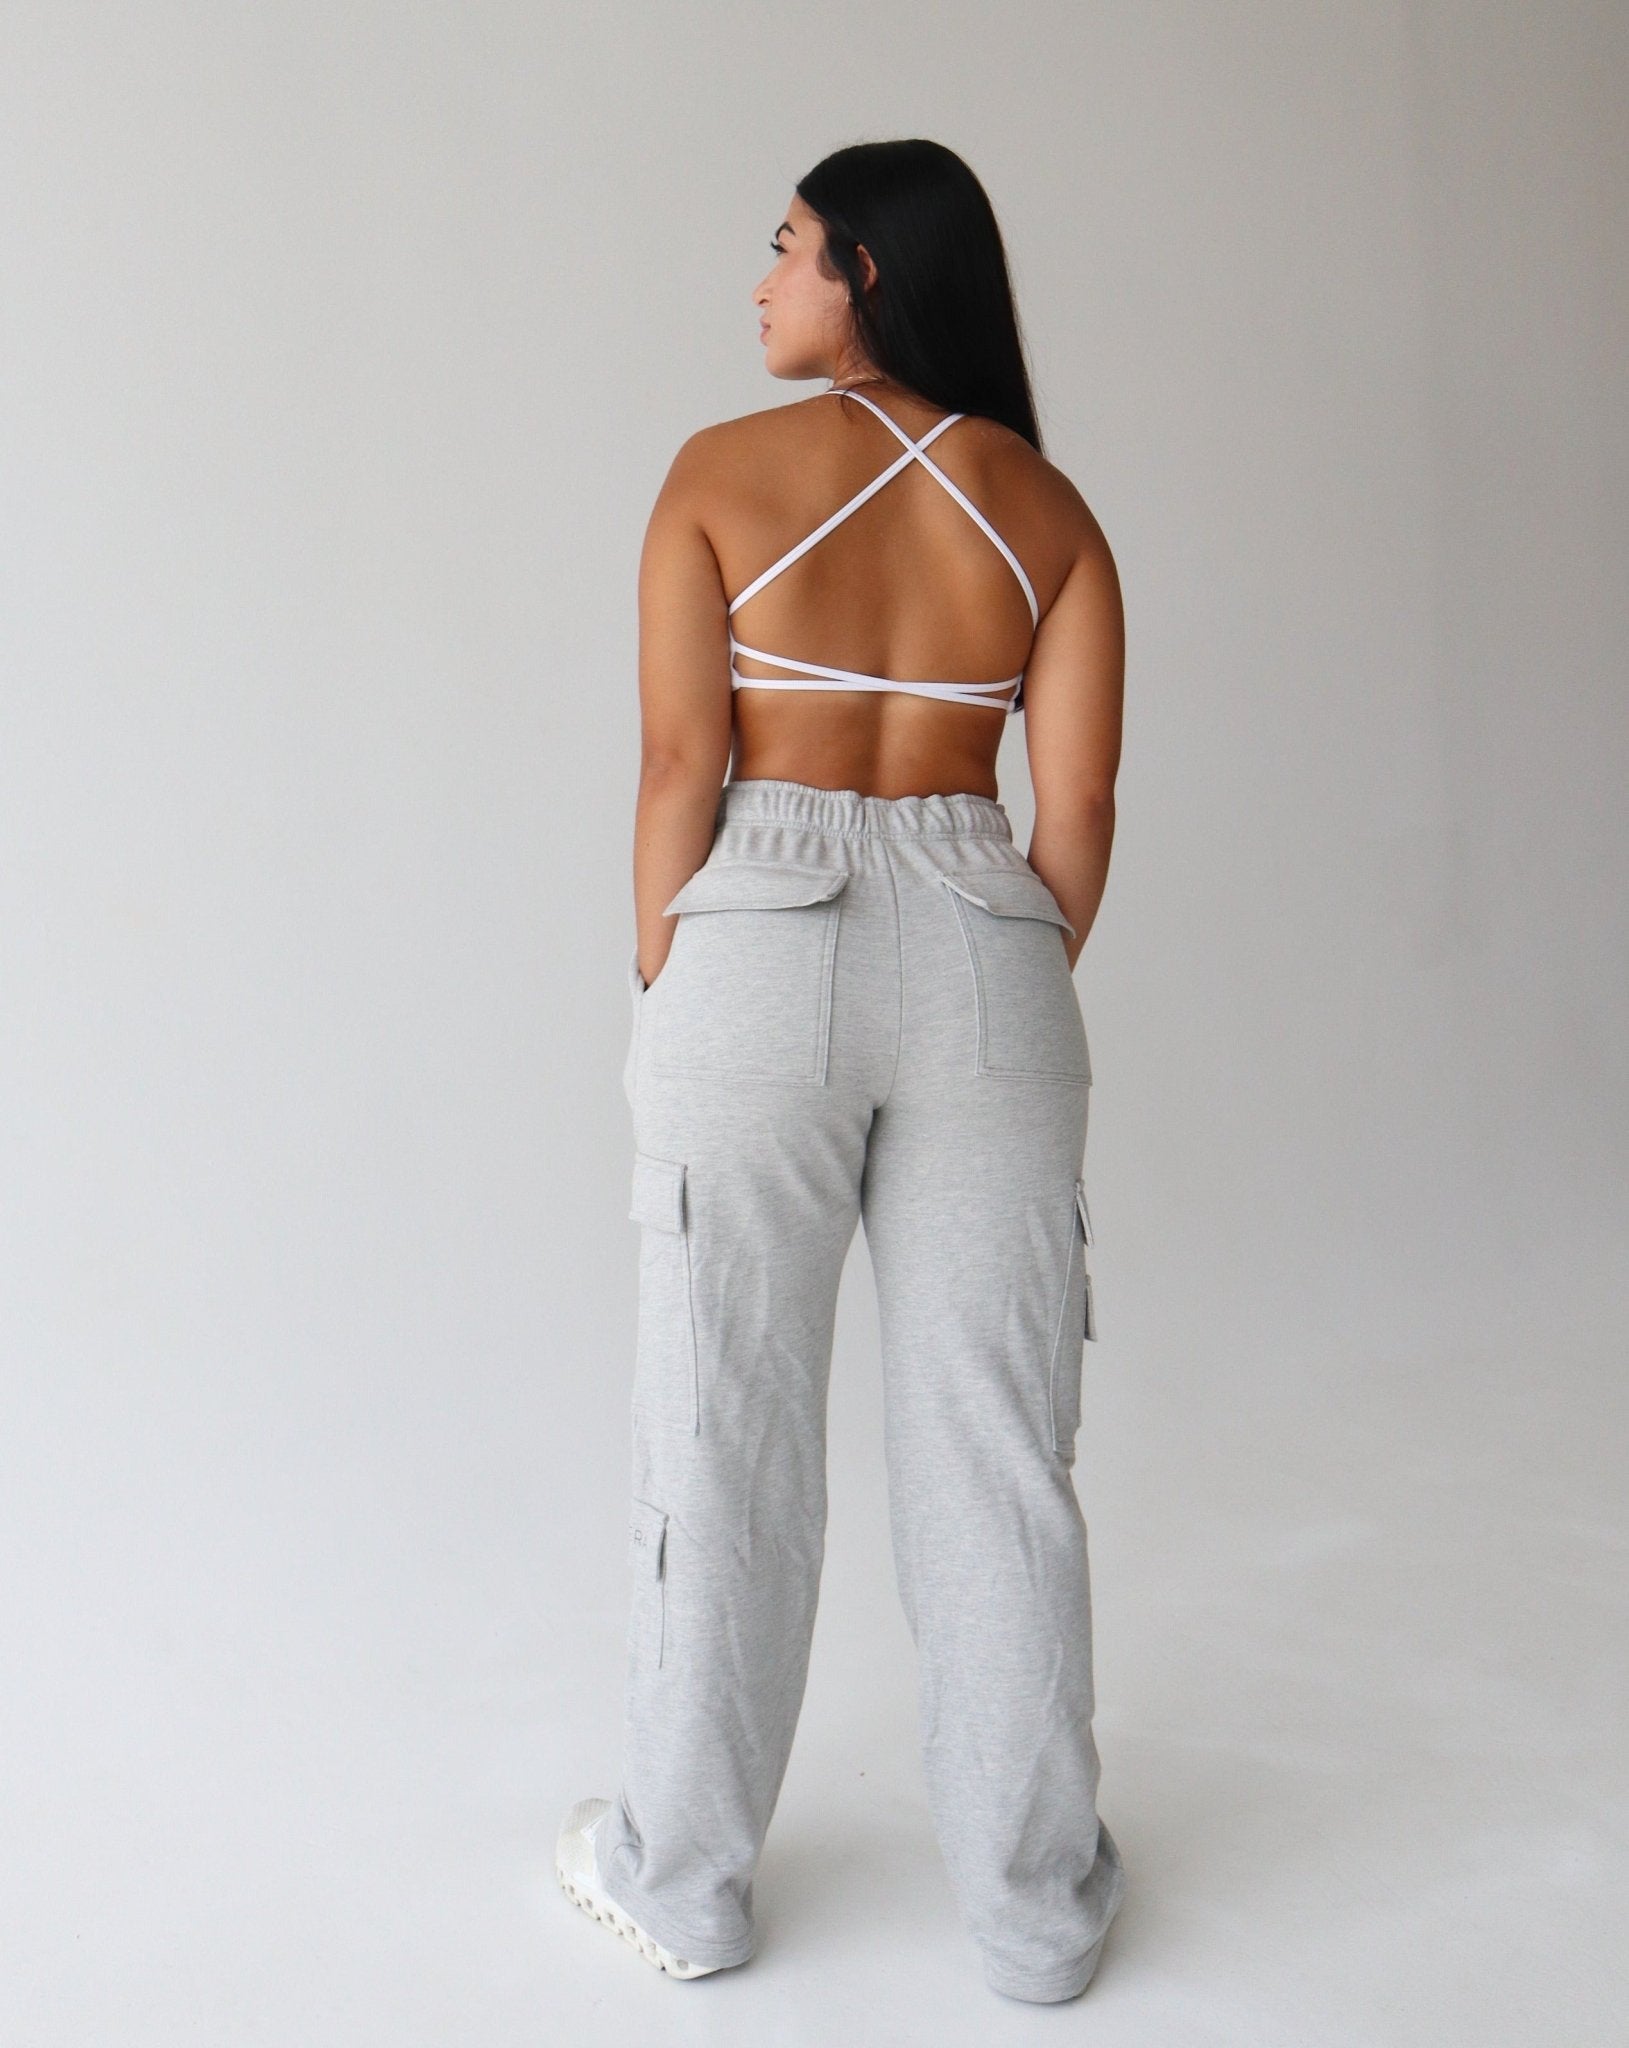 CMFRT Cargo Sweatpants - HEATHER GREY - LIBERA Fitness Apparel. Upgrade your loungewear with versatile and stylish cargo sweatpants. Experience comfort and convenience with functional pockets and an adjustable waistband.